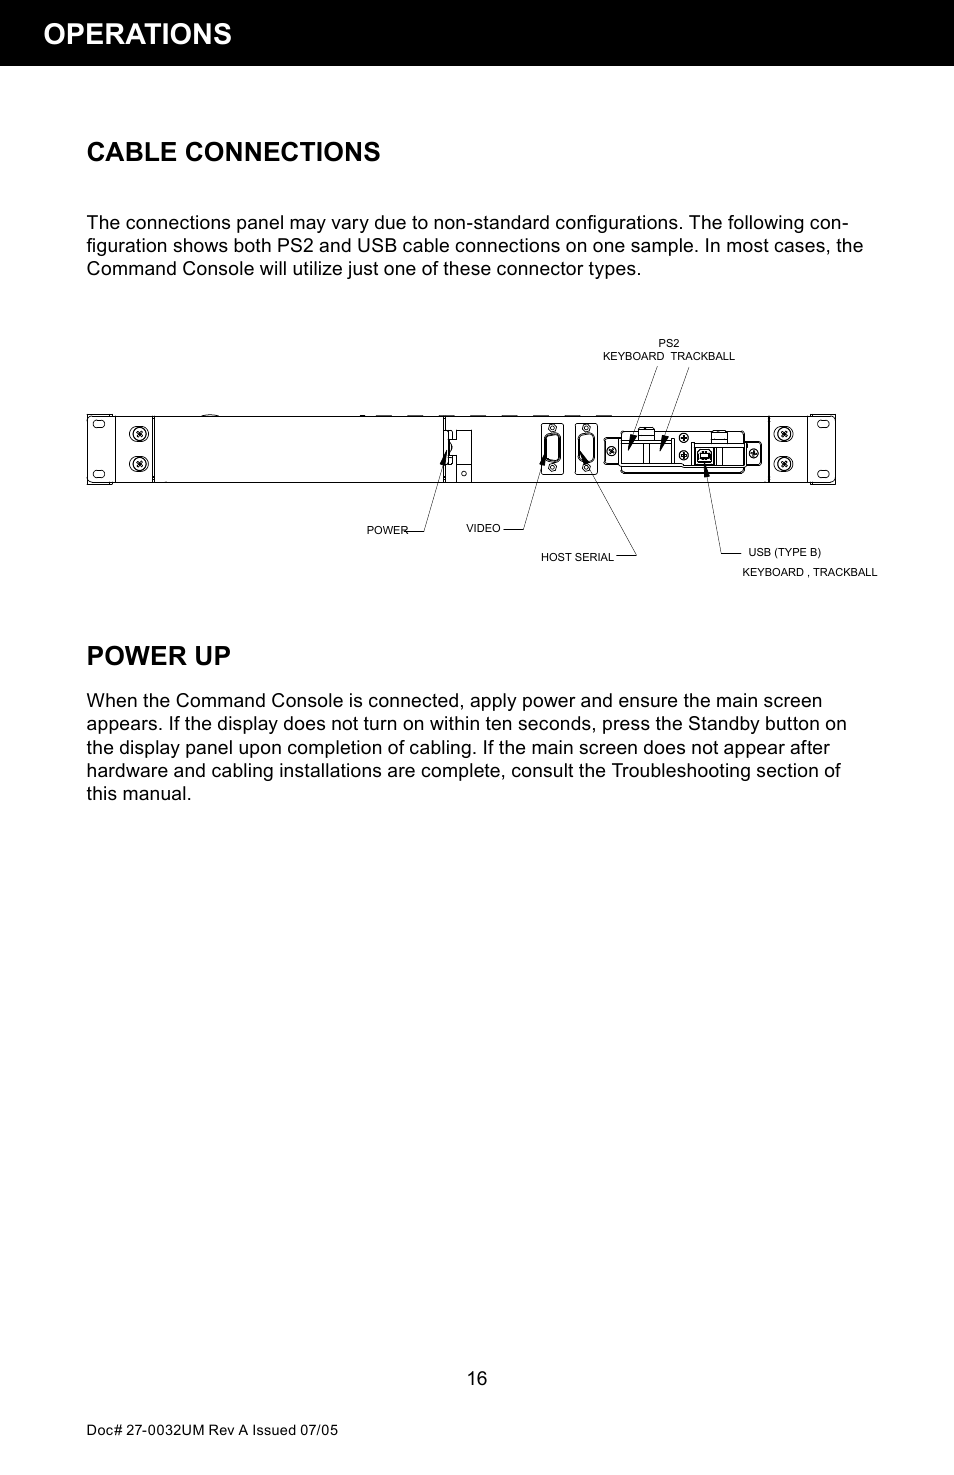 Operations, Cable connections, Power up | Z Microsystems SL User Manual | Page 16 / 51